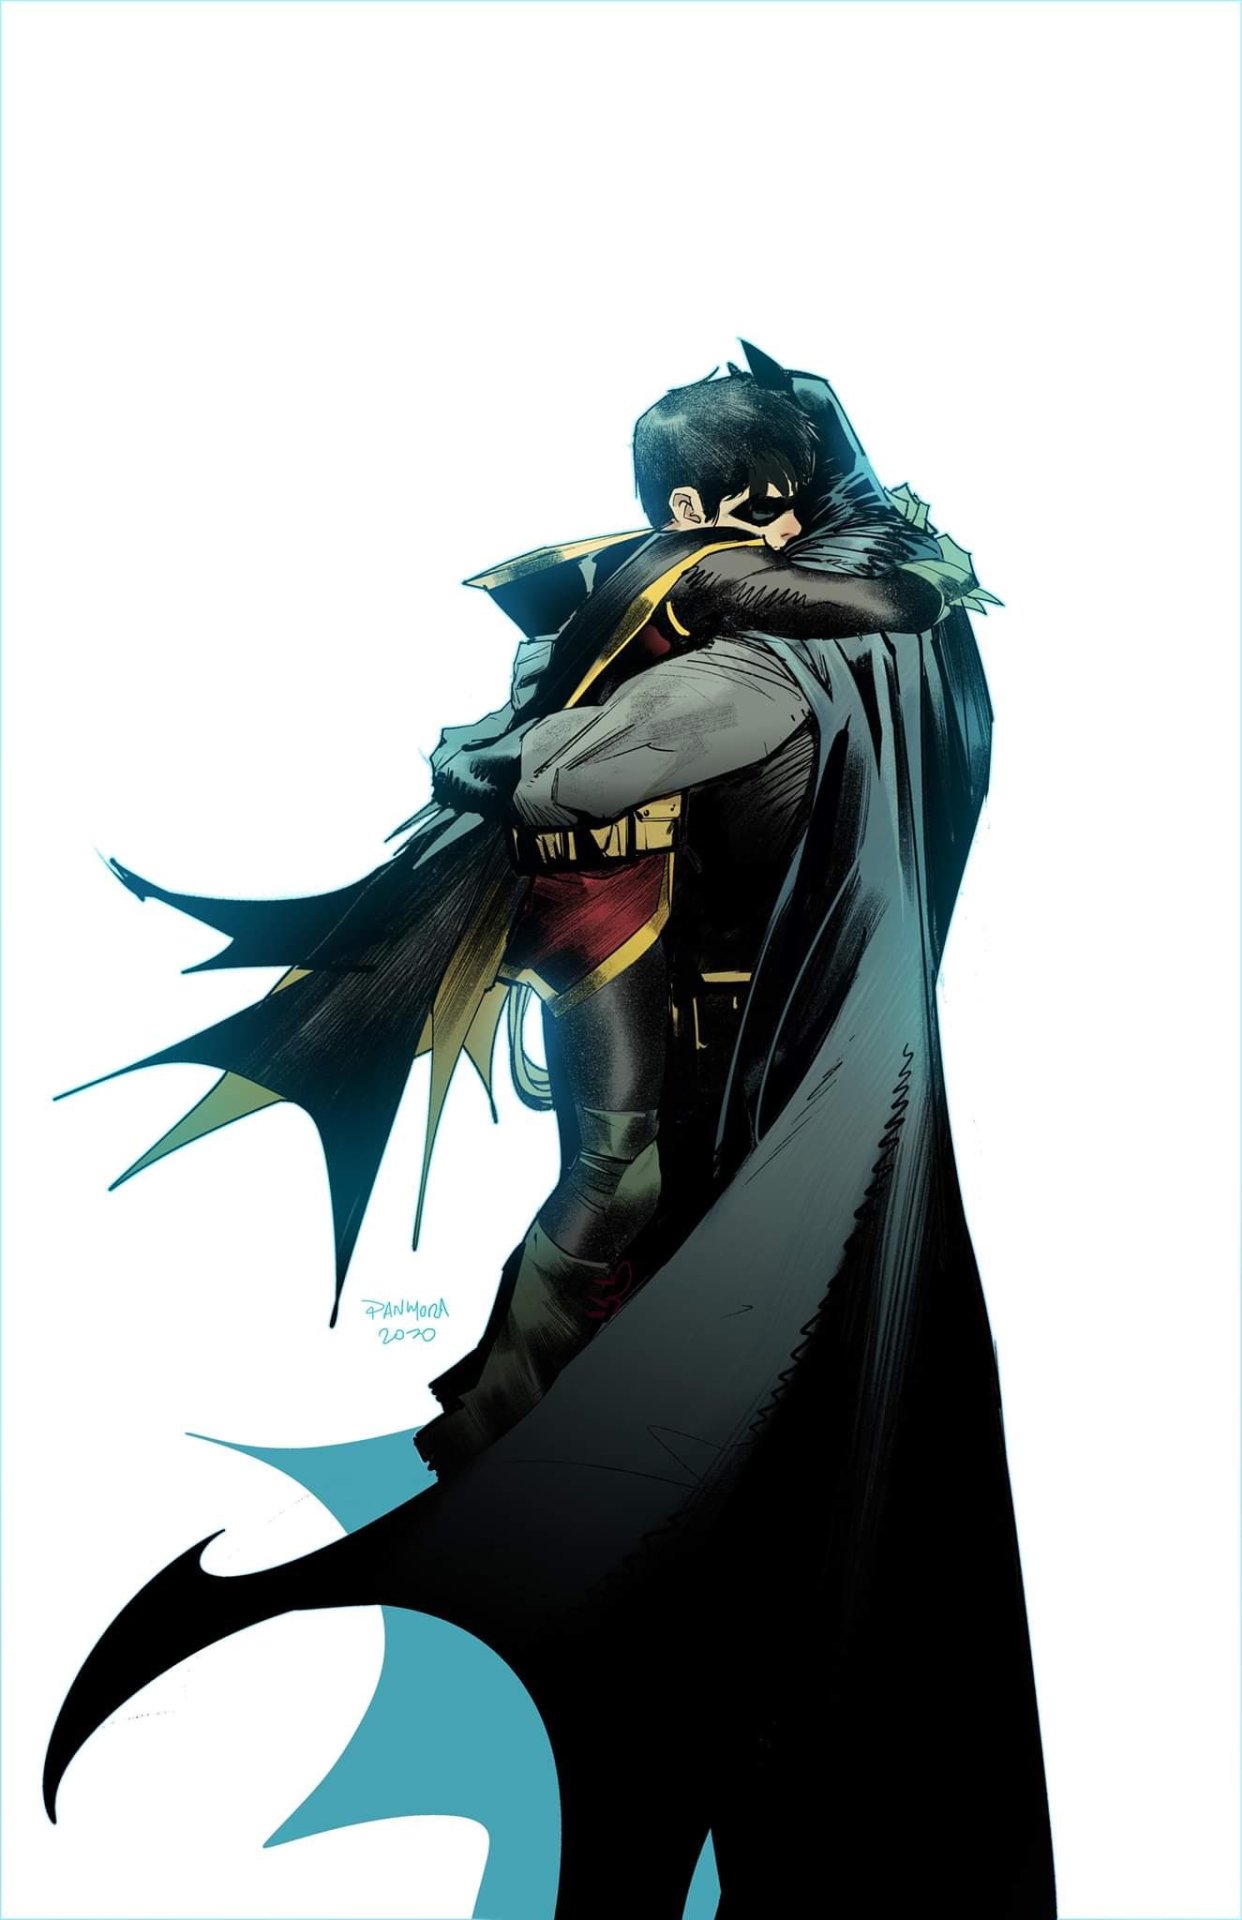 Ŧꃅᙍ ꍏ尺Ϯ Ծ₣ ੮ℌΣ Շ⊕√乇Ɽ — Batman and Robin: Father's Day fan art (2020) Art...